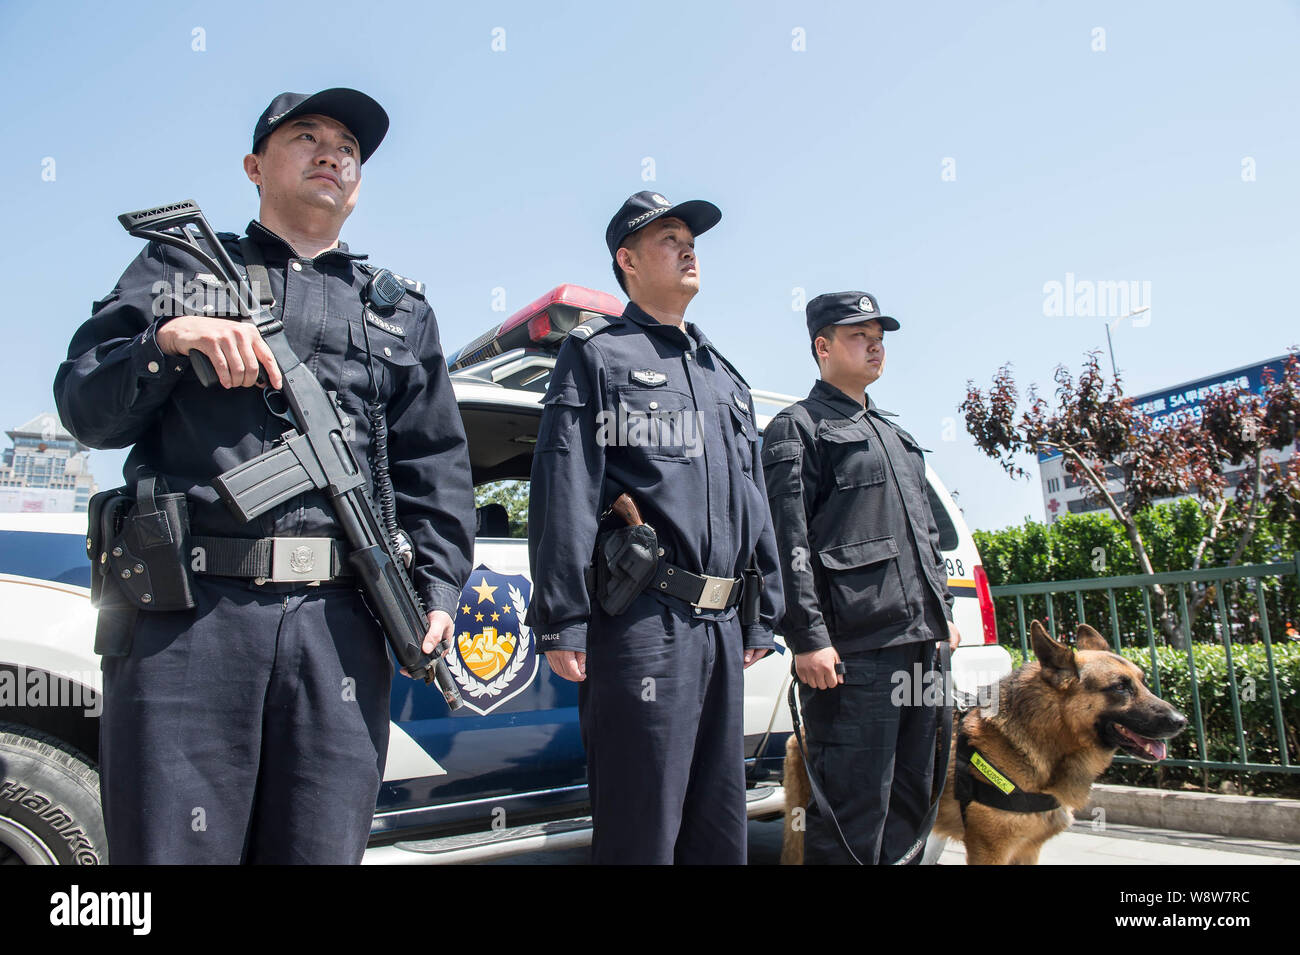 Chinese police officers armed with guns stand guard with a police dog in front of a patrol vehicle on a street in Beijing, China, 12 May 2014.   Beiji Stock Photo